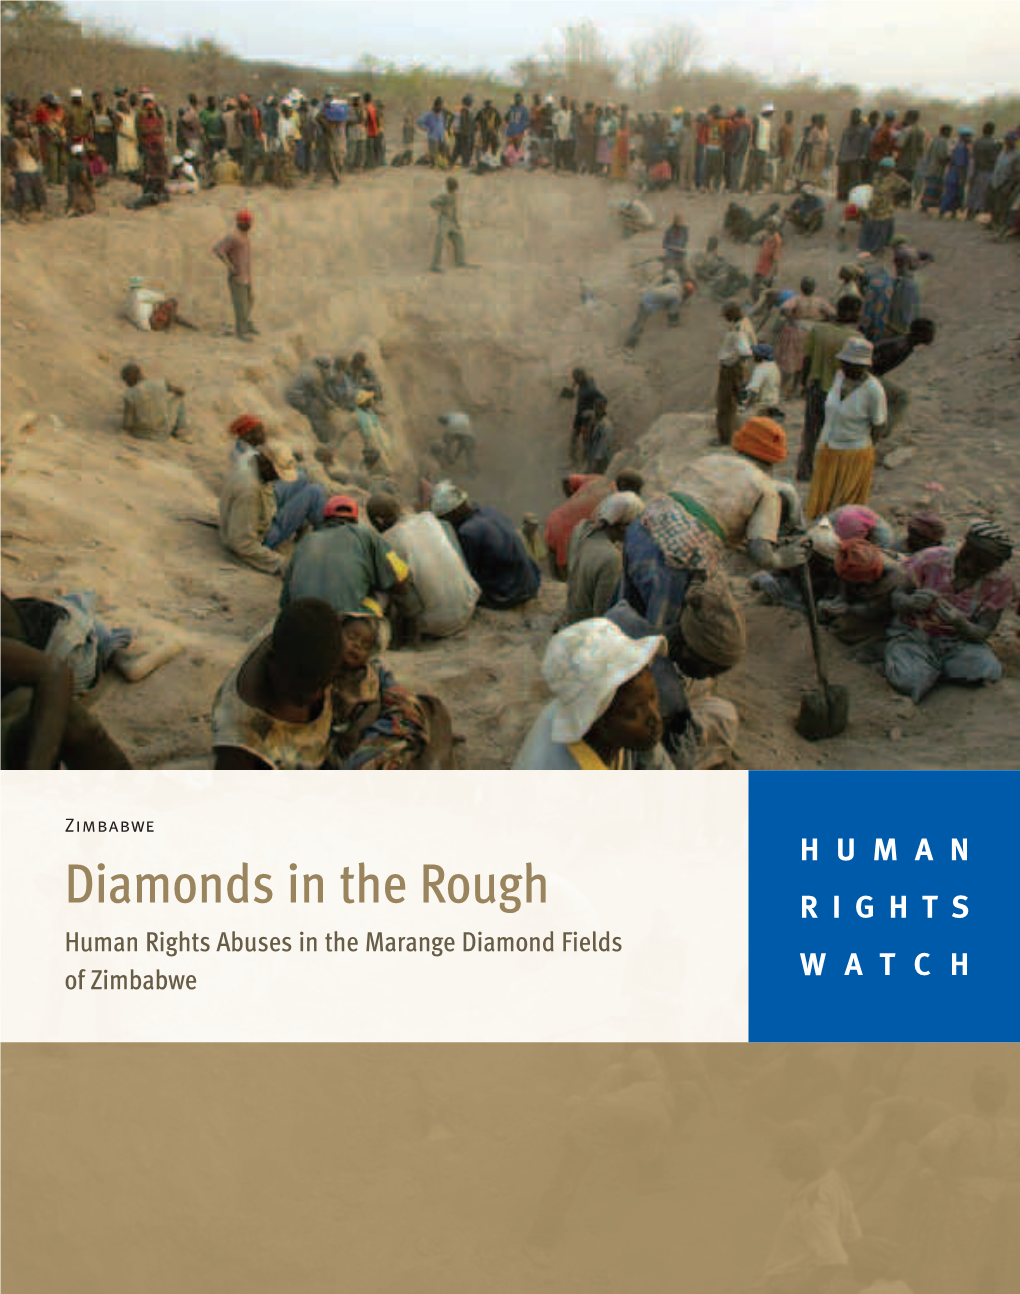 Diamonds in the Rough RIGHTS Human Rights Abuses in the Marange Diamond Fields of Zimbabwe WATCH